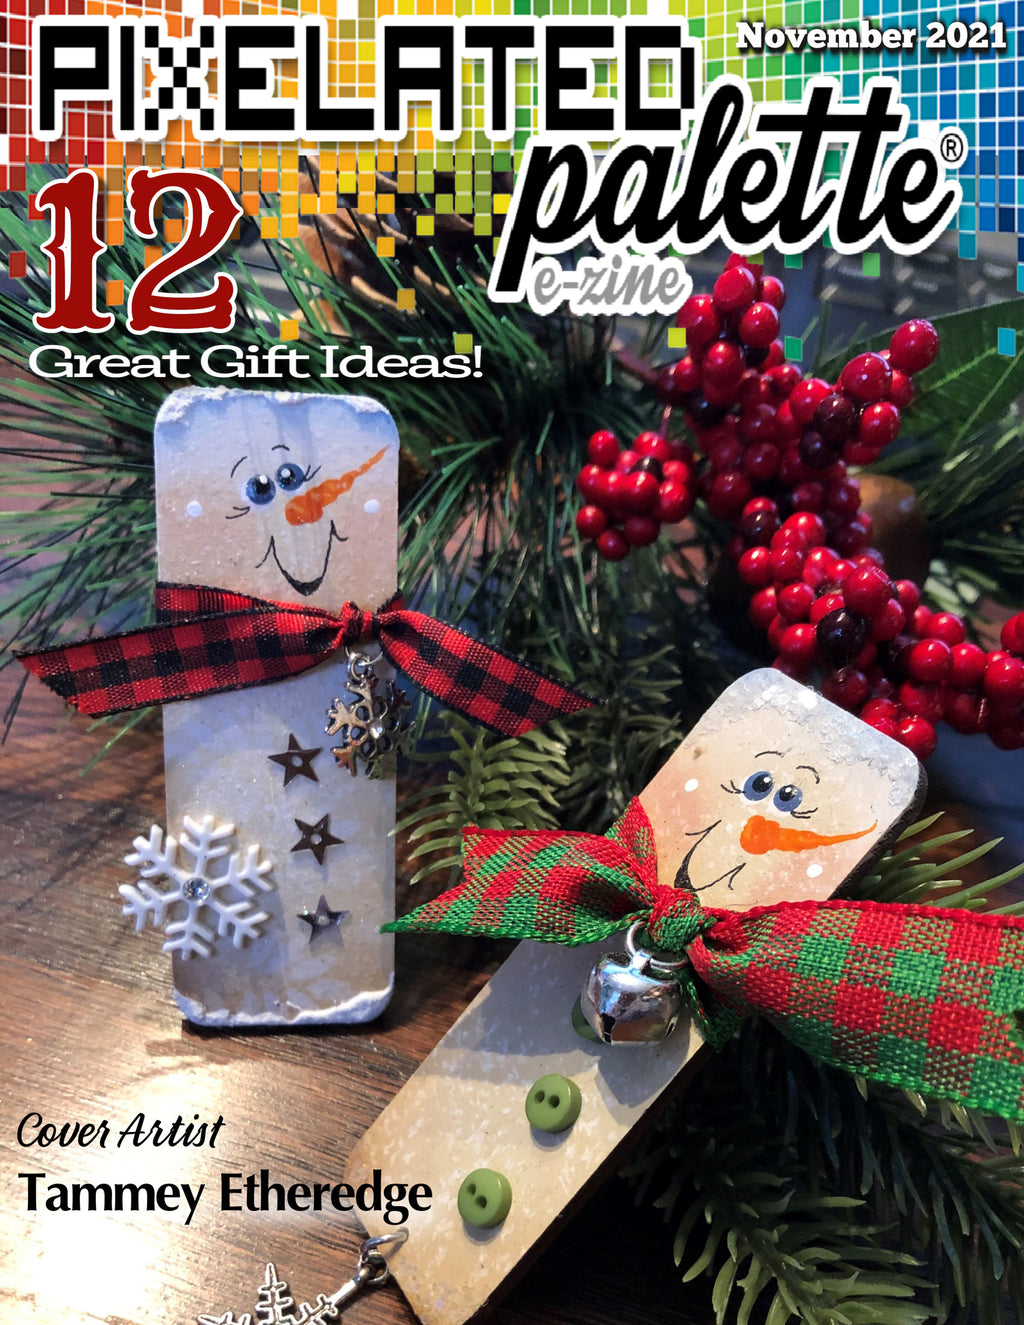 Pixelated Palette - November 2021 Issue Download